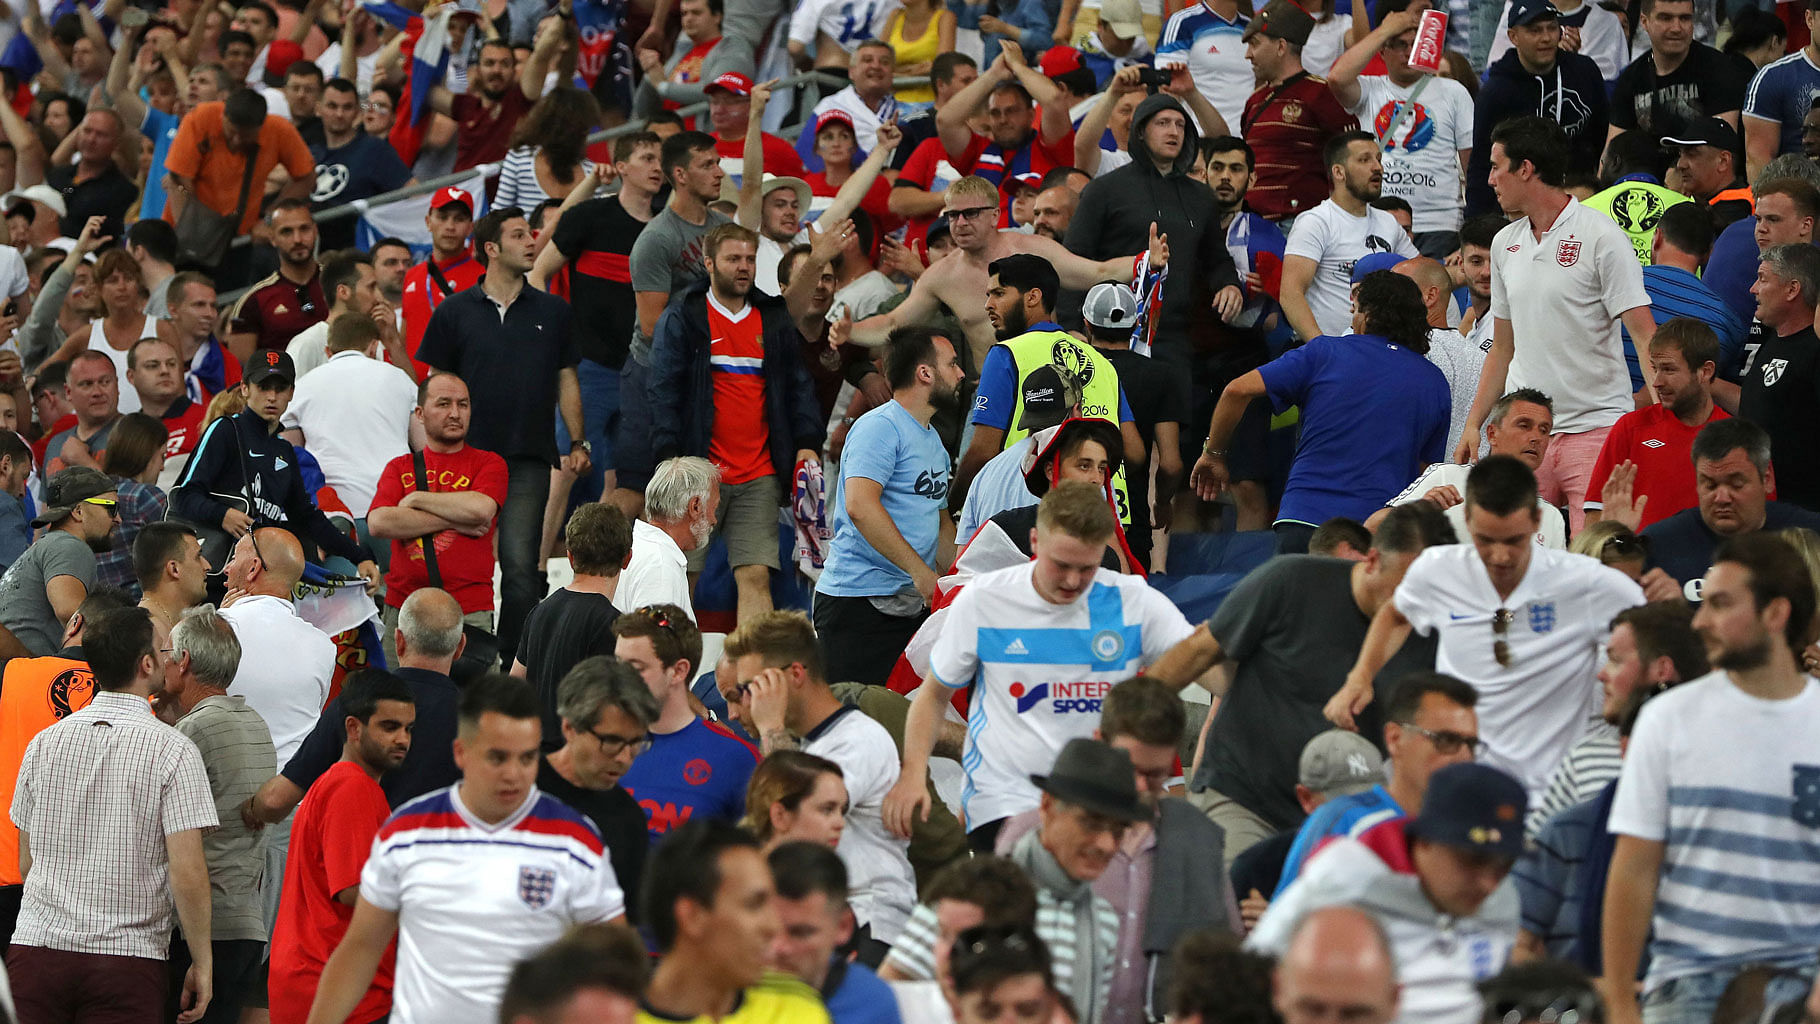 Russian supporters charge at England fans in the stands at the end of the match on 11 June. (Photo: AP)